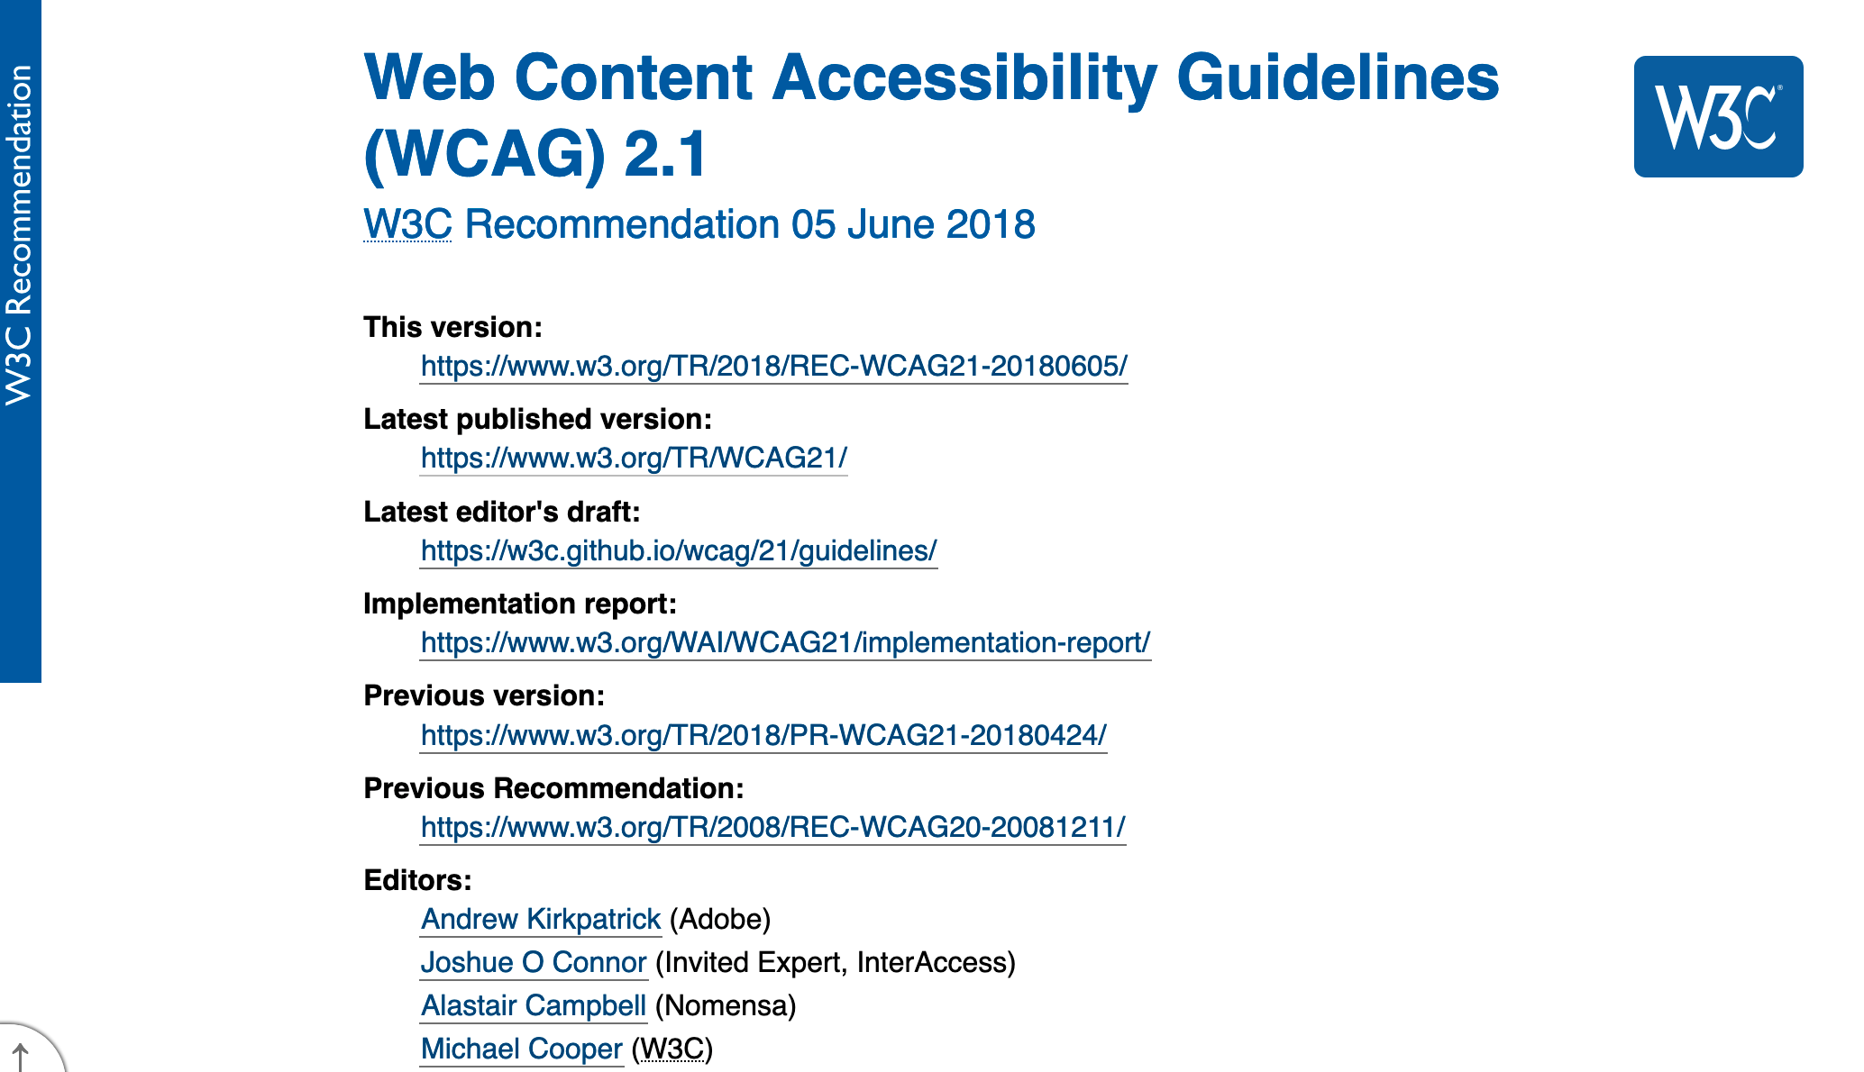 Web Content Accessibility Guidelines 2.1 front page